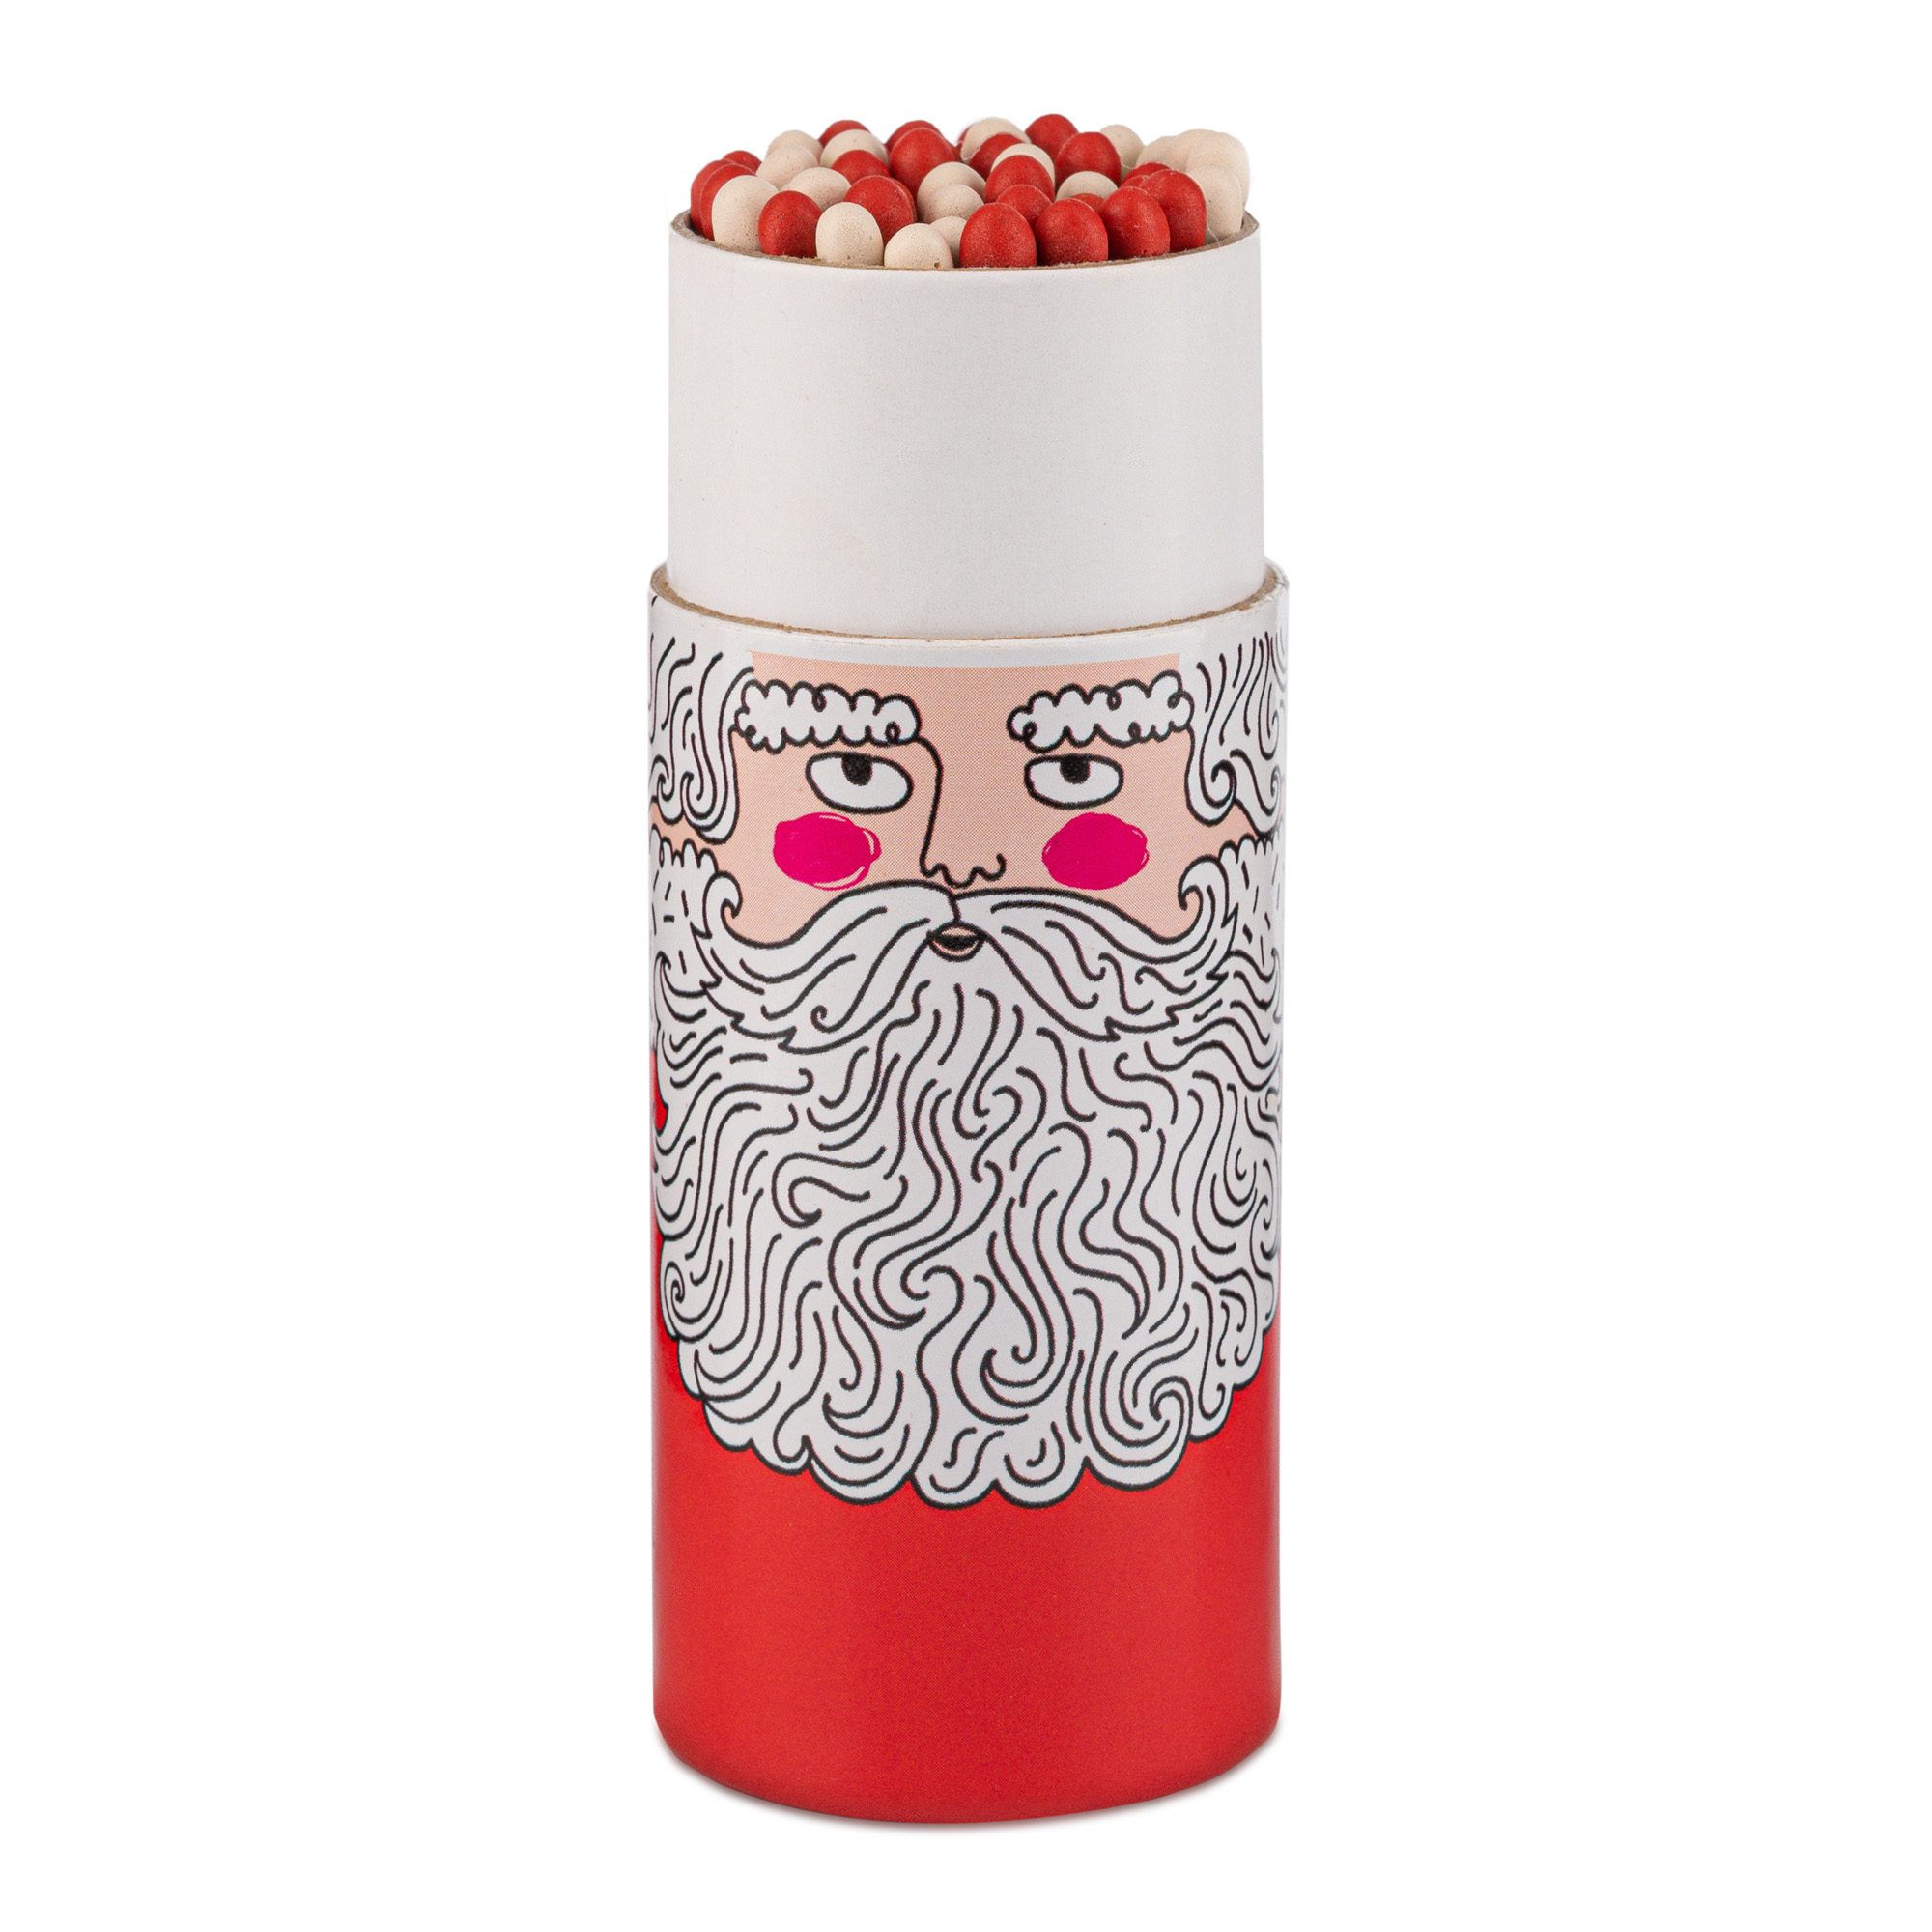 Father Christmas Cylinder Matches - Cylinder Matches - Archivist - from Archivist Gallery view